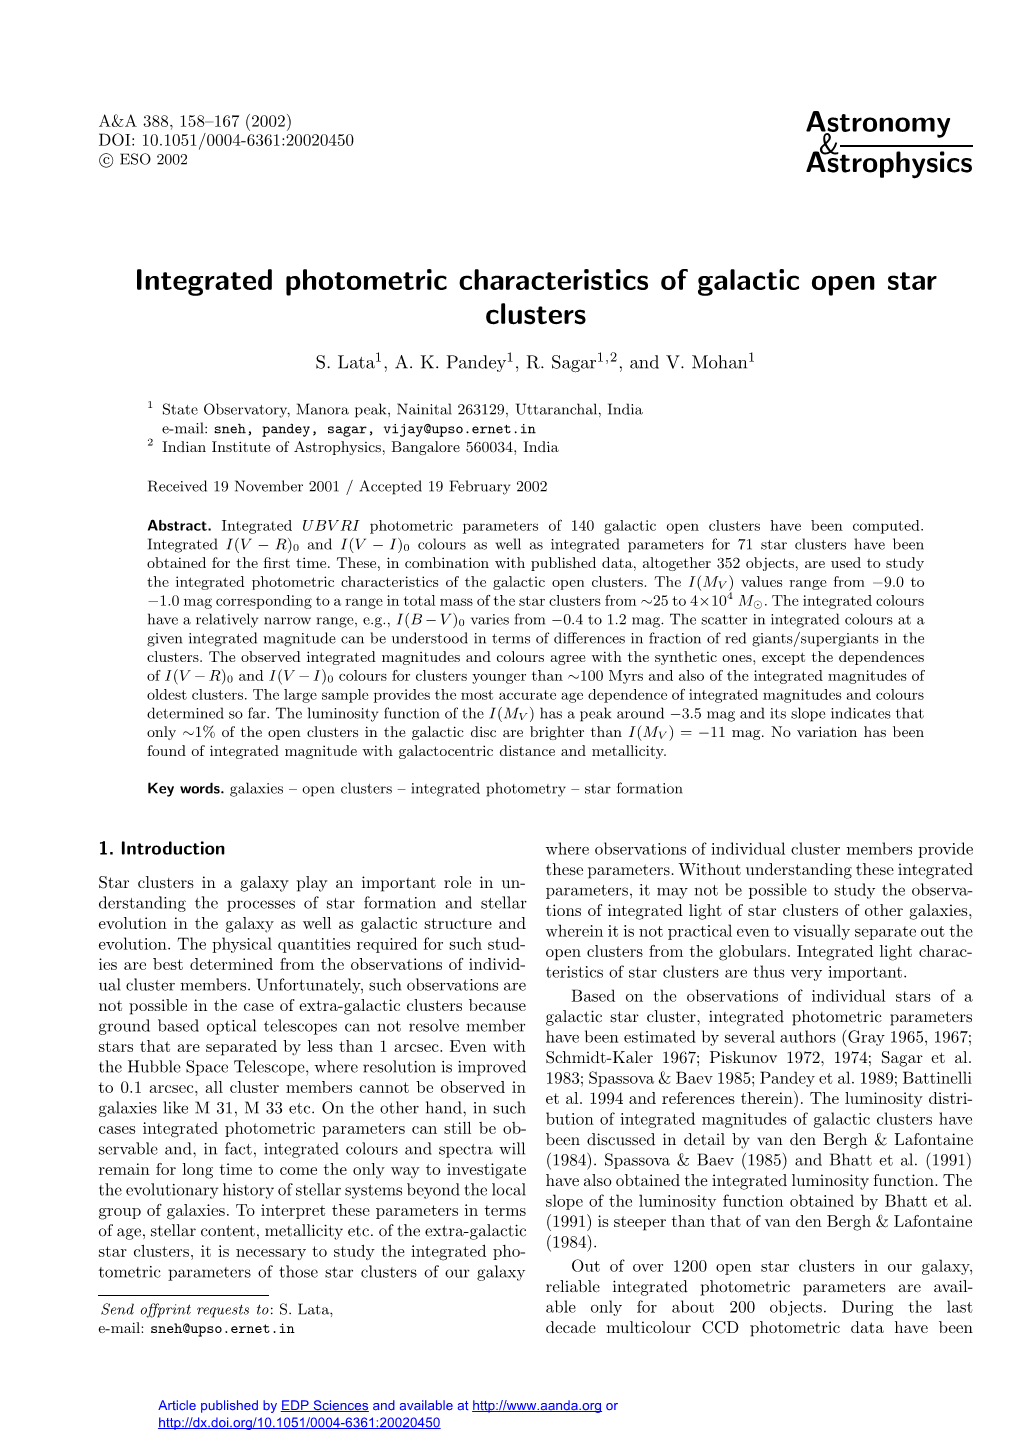 Astronomy & Astrophysics Integrated Photometric Characteristics of Galactic Open Star Clusters